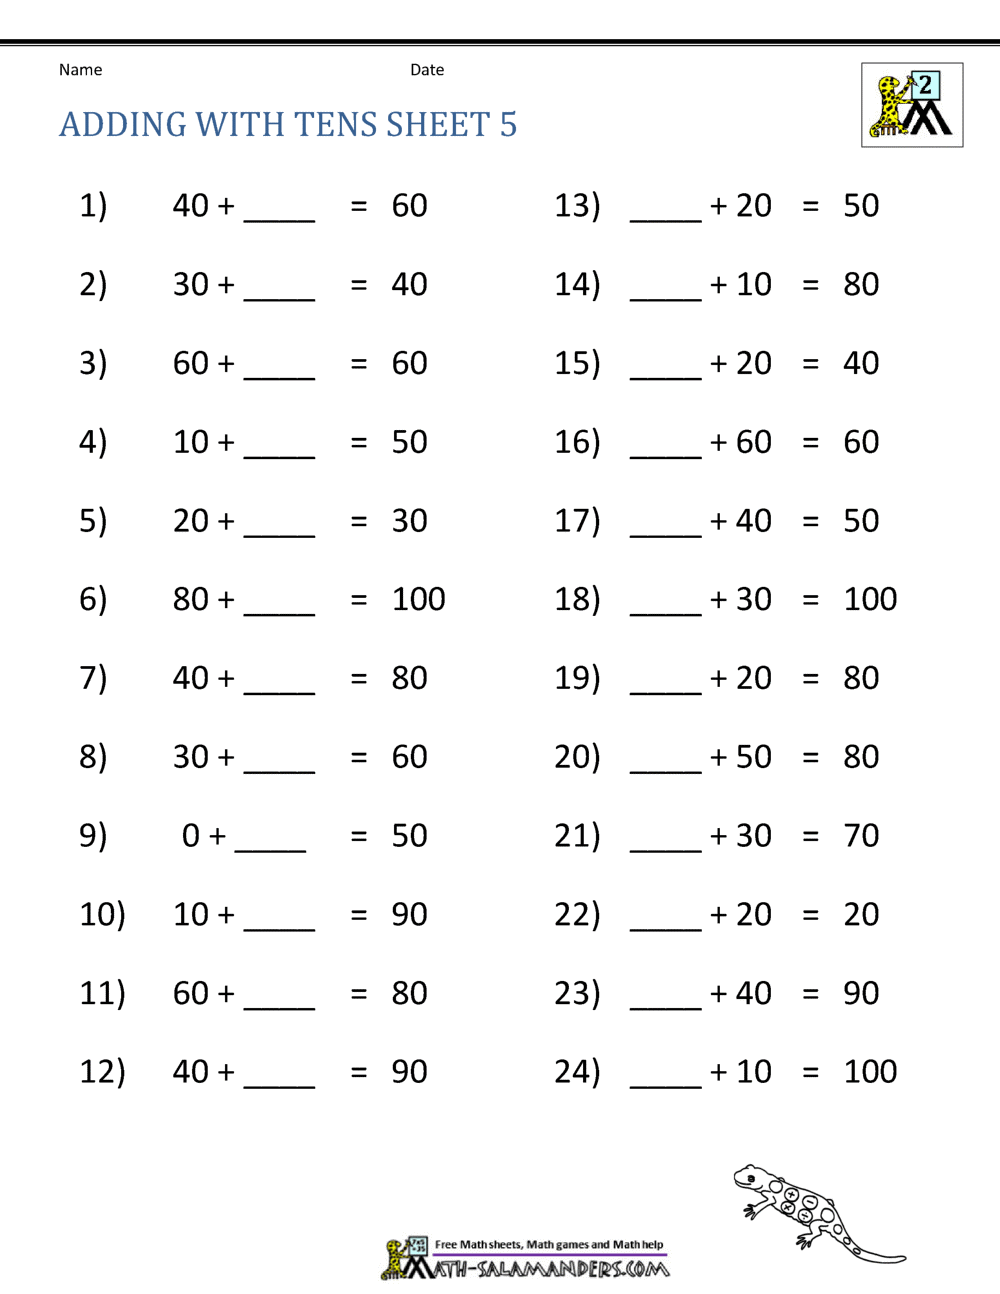 Add 10 To A Number Worksheets WorksheetsCity